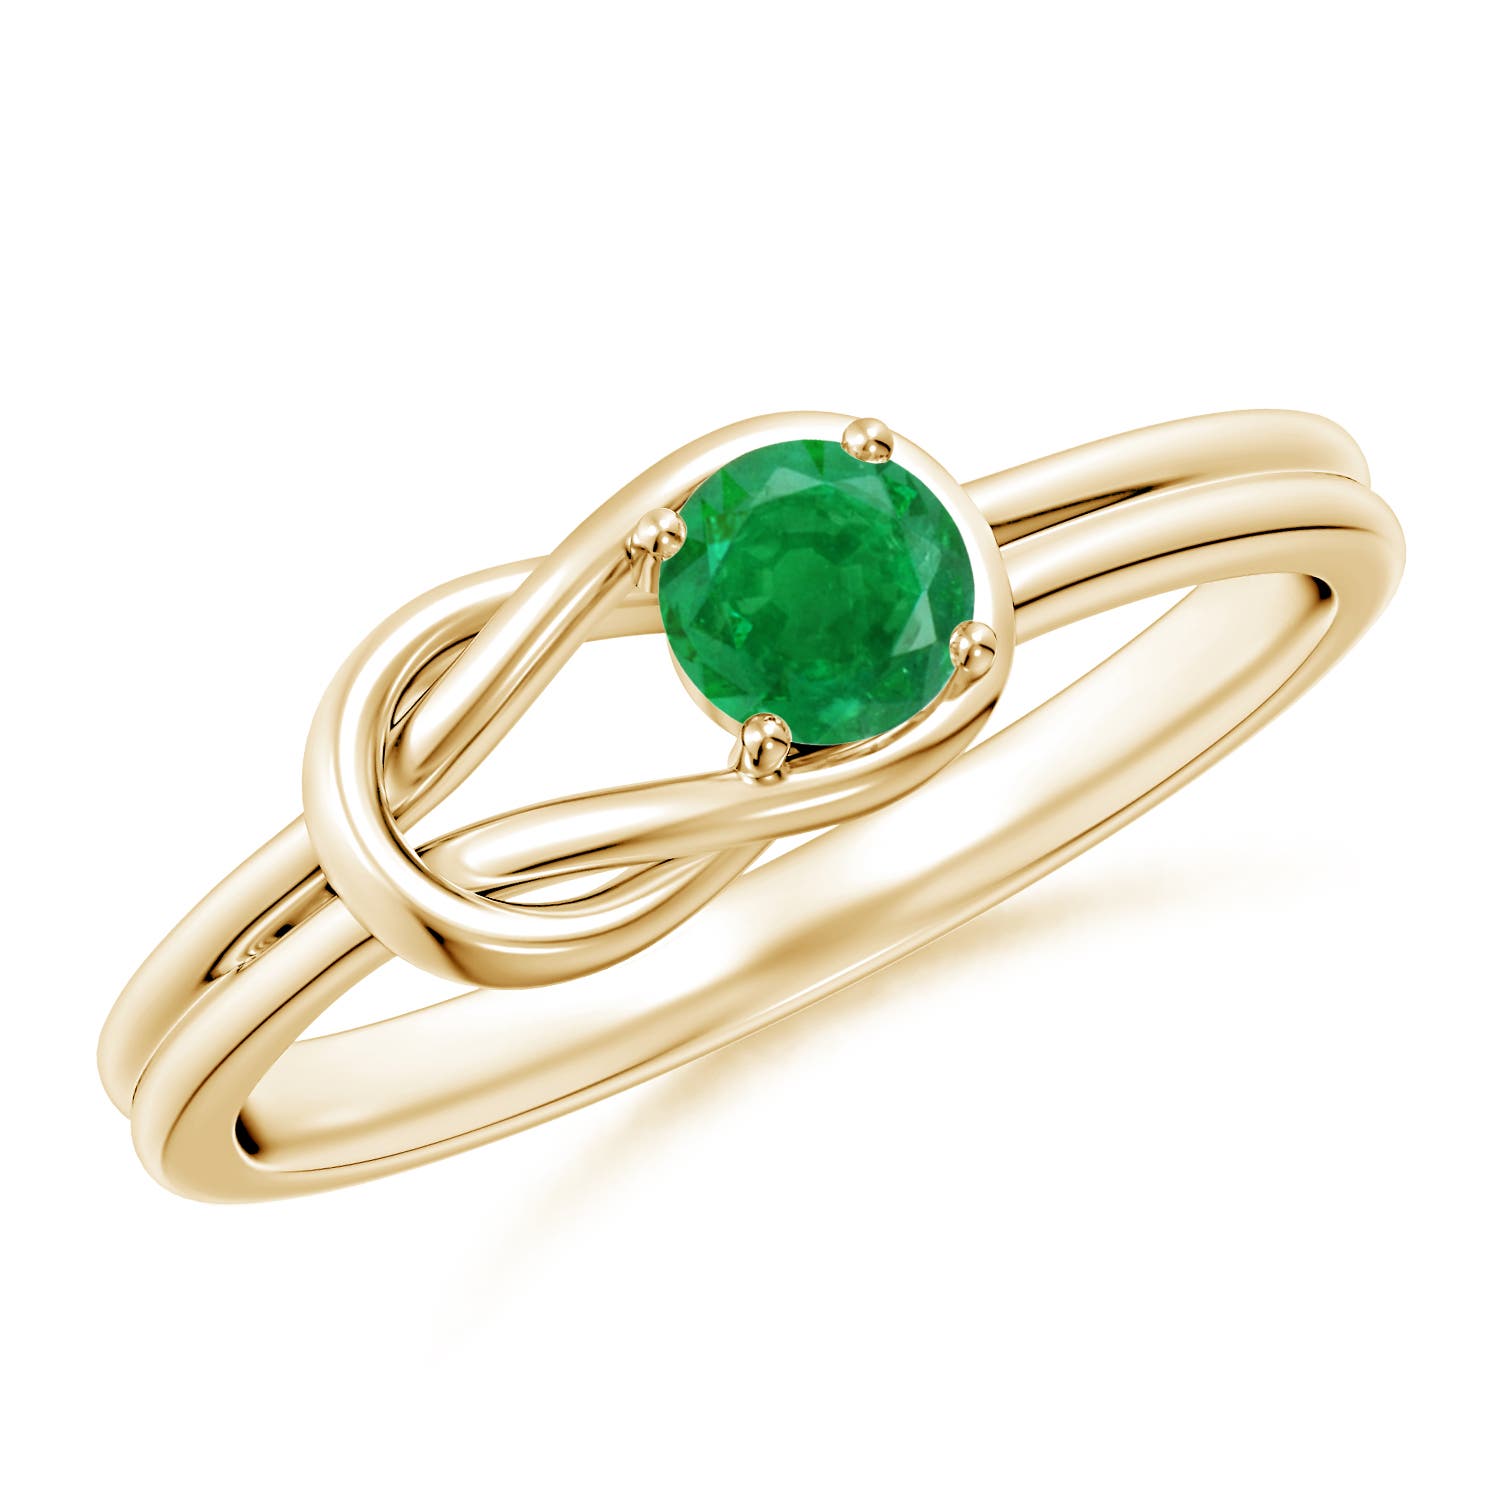 AA - Emerald / 0.24 CT / 14 KT Yellow Gold